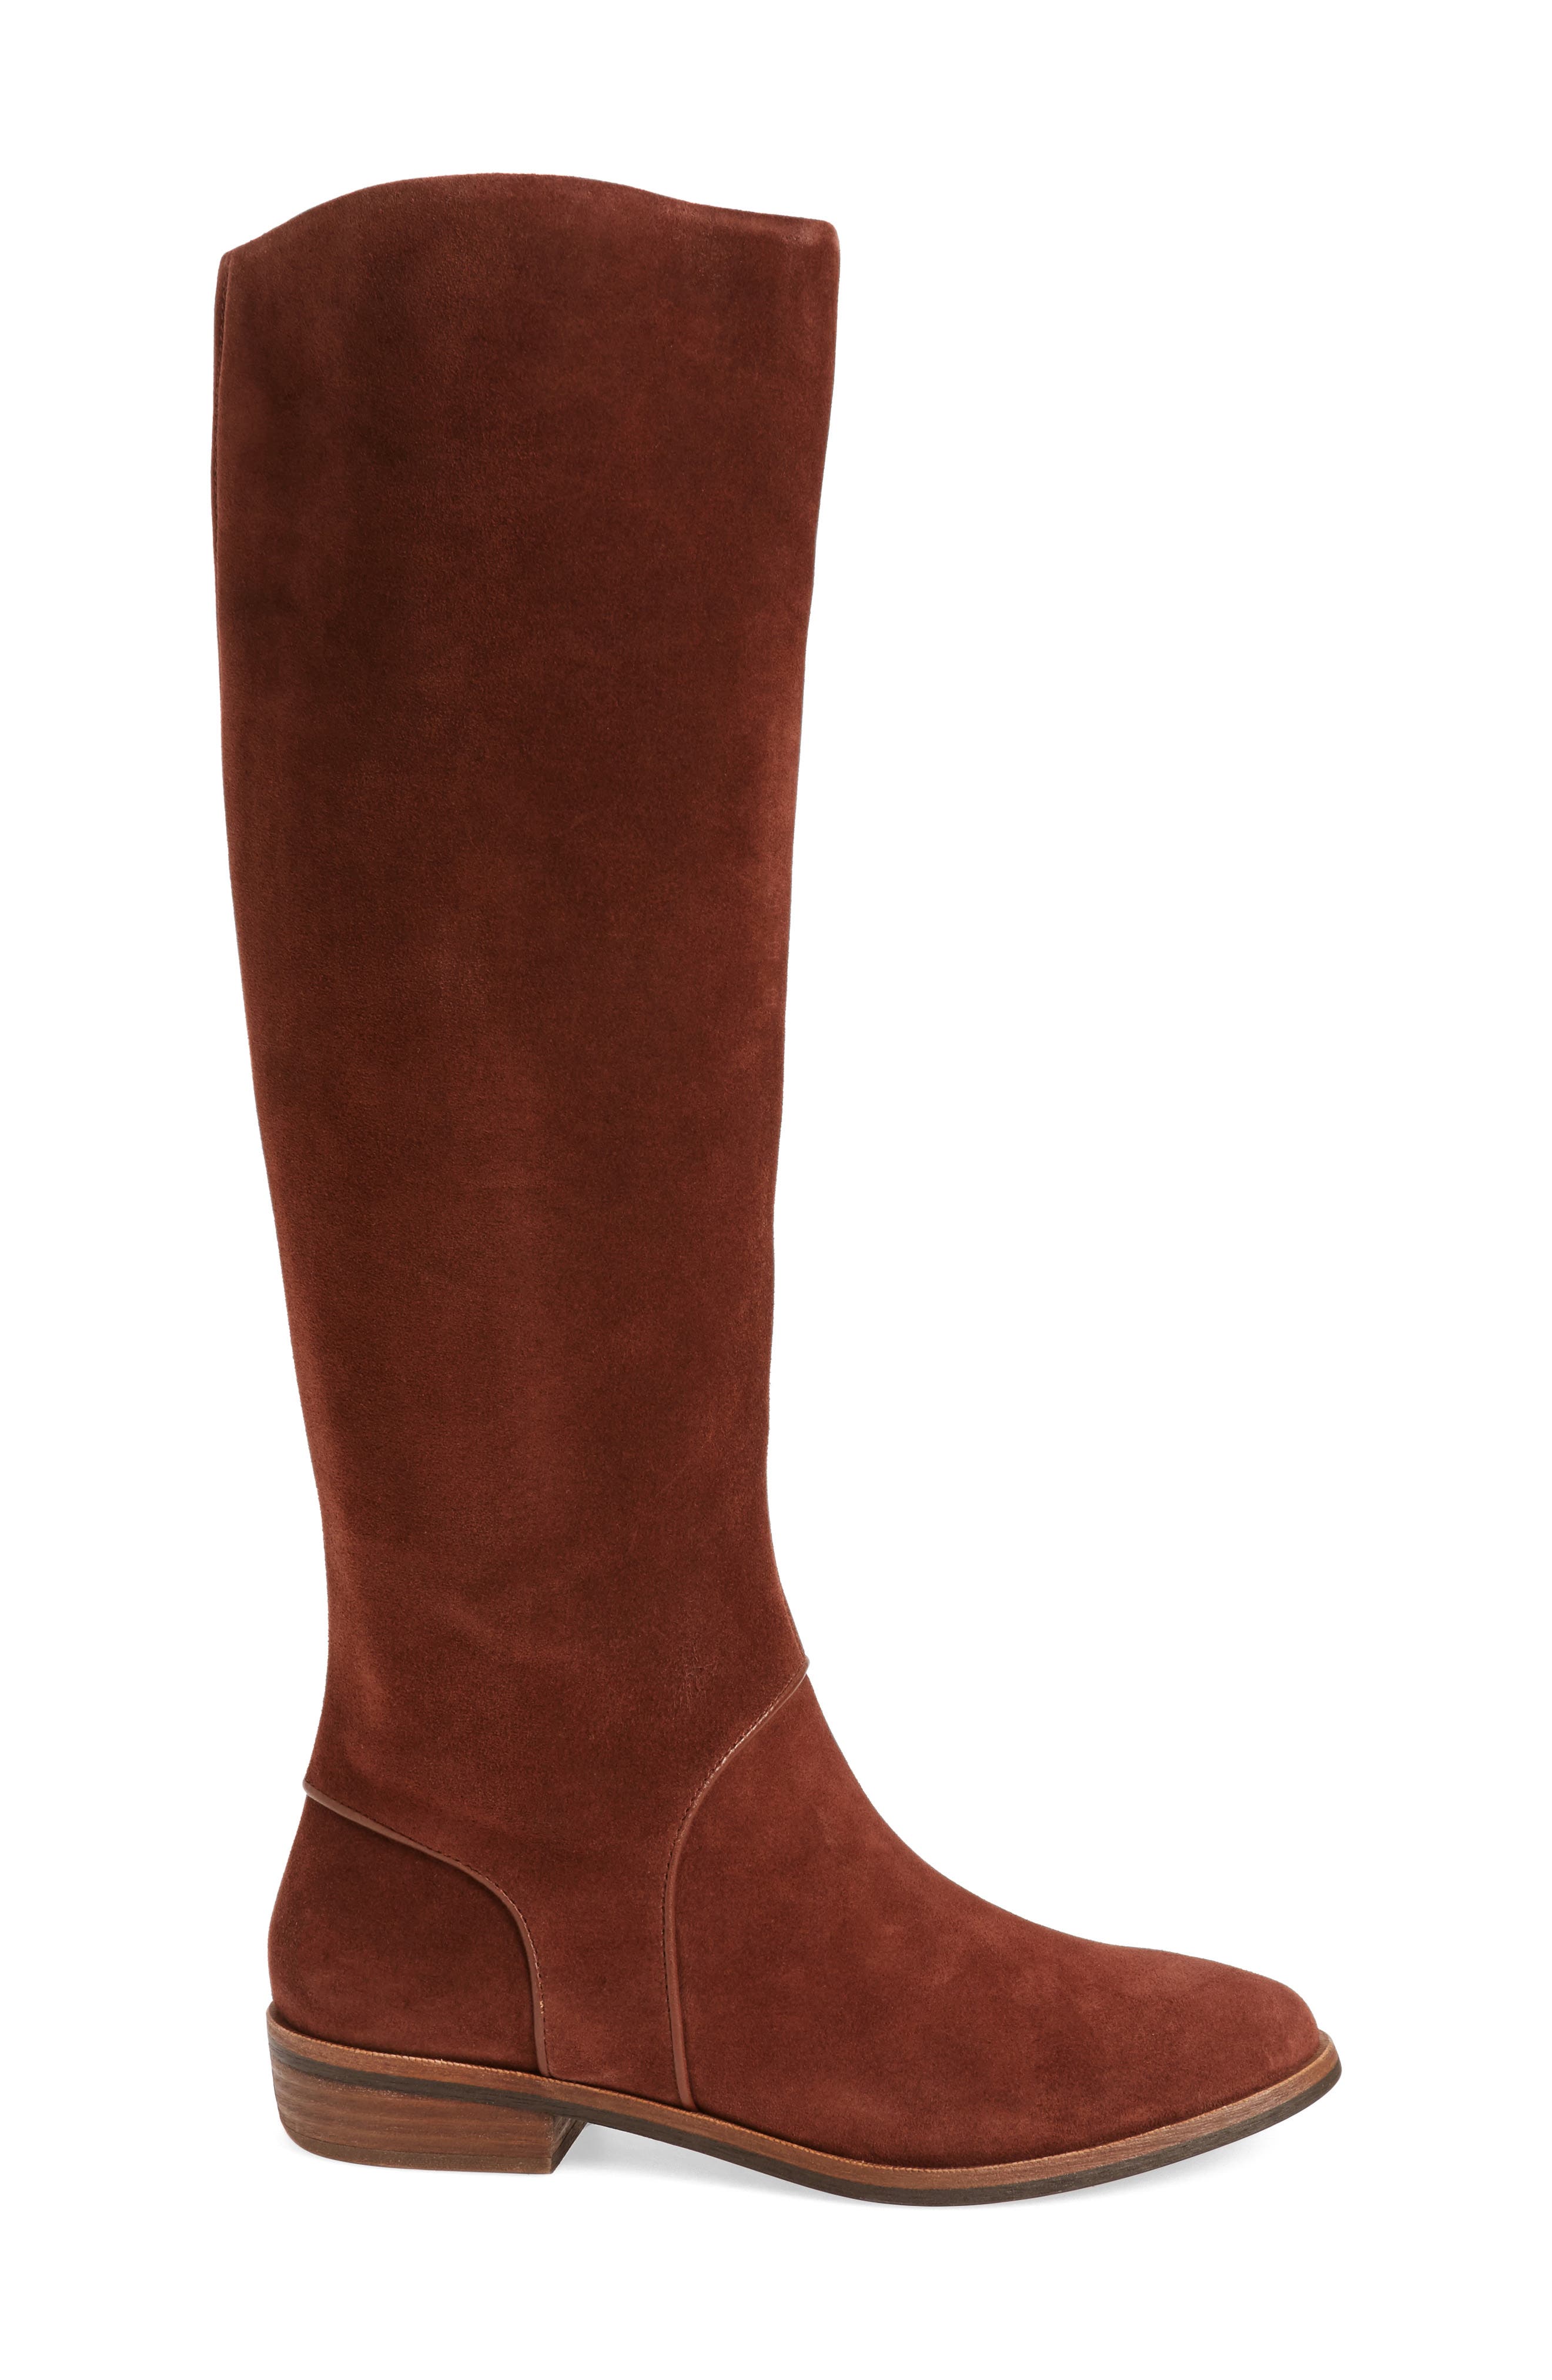 ugg australia daley suede boots